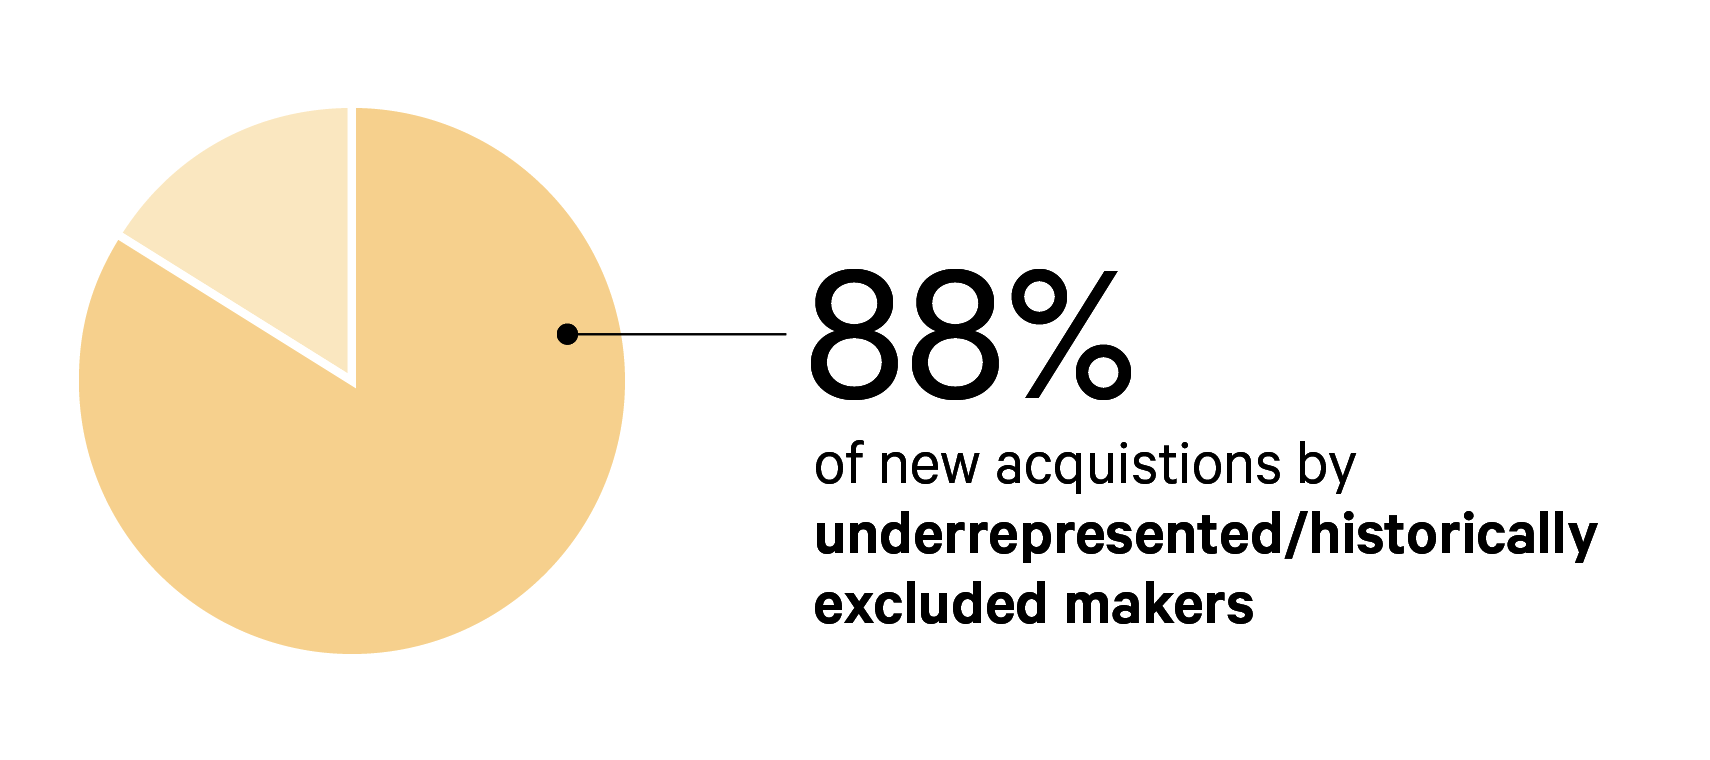 Pie chart. A line points to the largest portion, with text that reads: “88% of new acquisitions by underrepresented / historically excluded makers.”